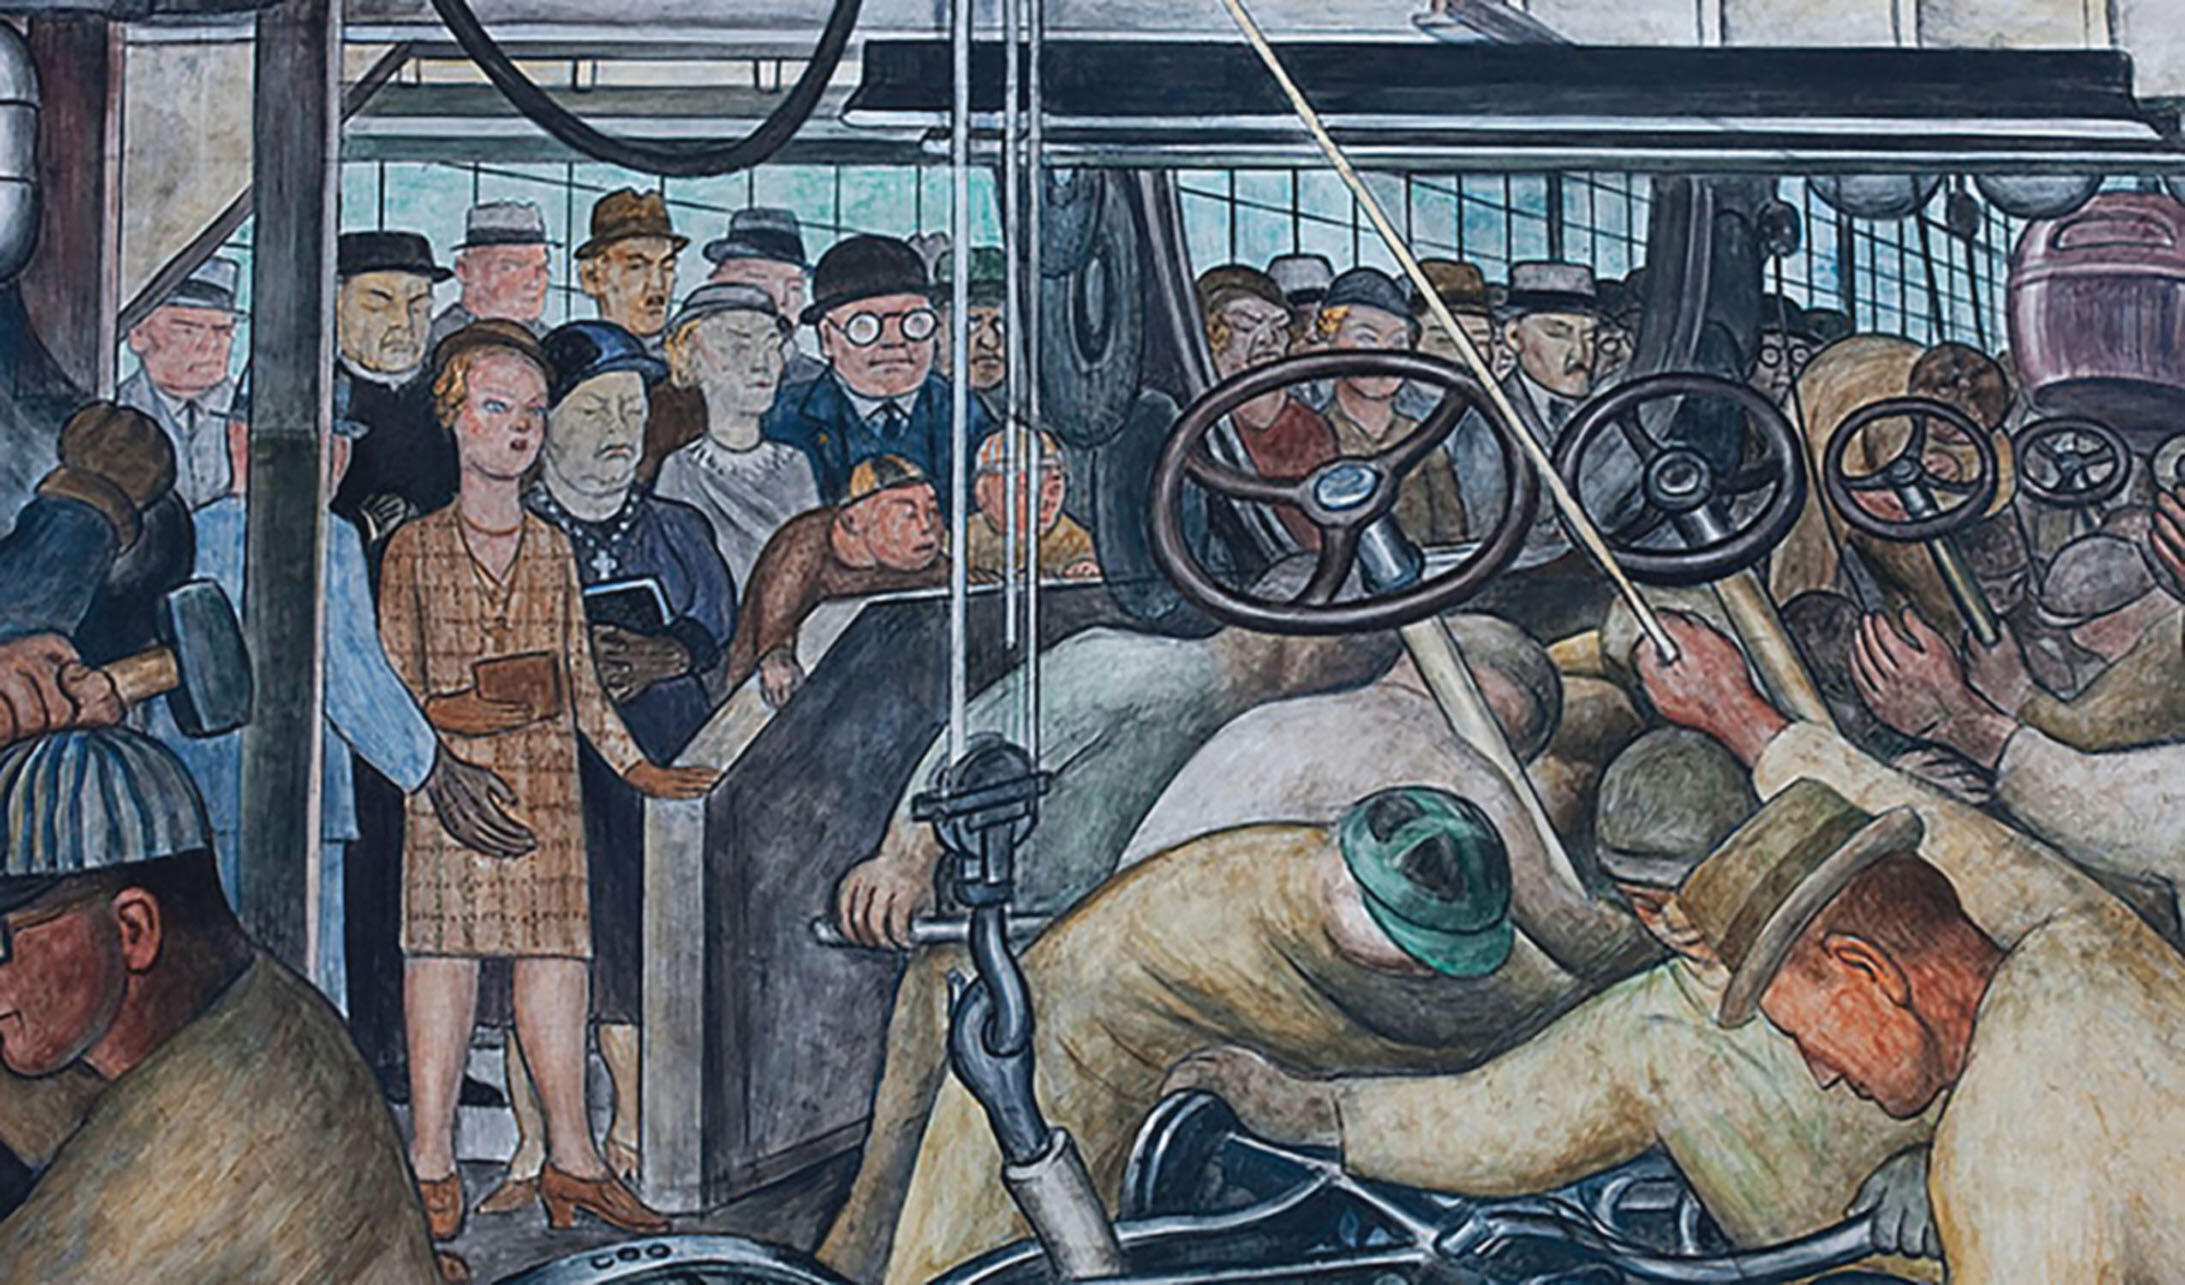 "Detroit Industry,"Detail from “Detroit Industry,” south wall, shows visitors to the Rouge, including the Katzenjammer Kids (center).